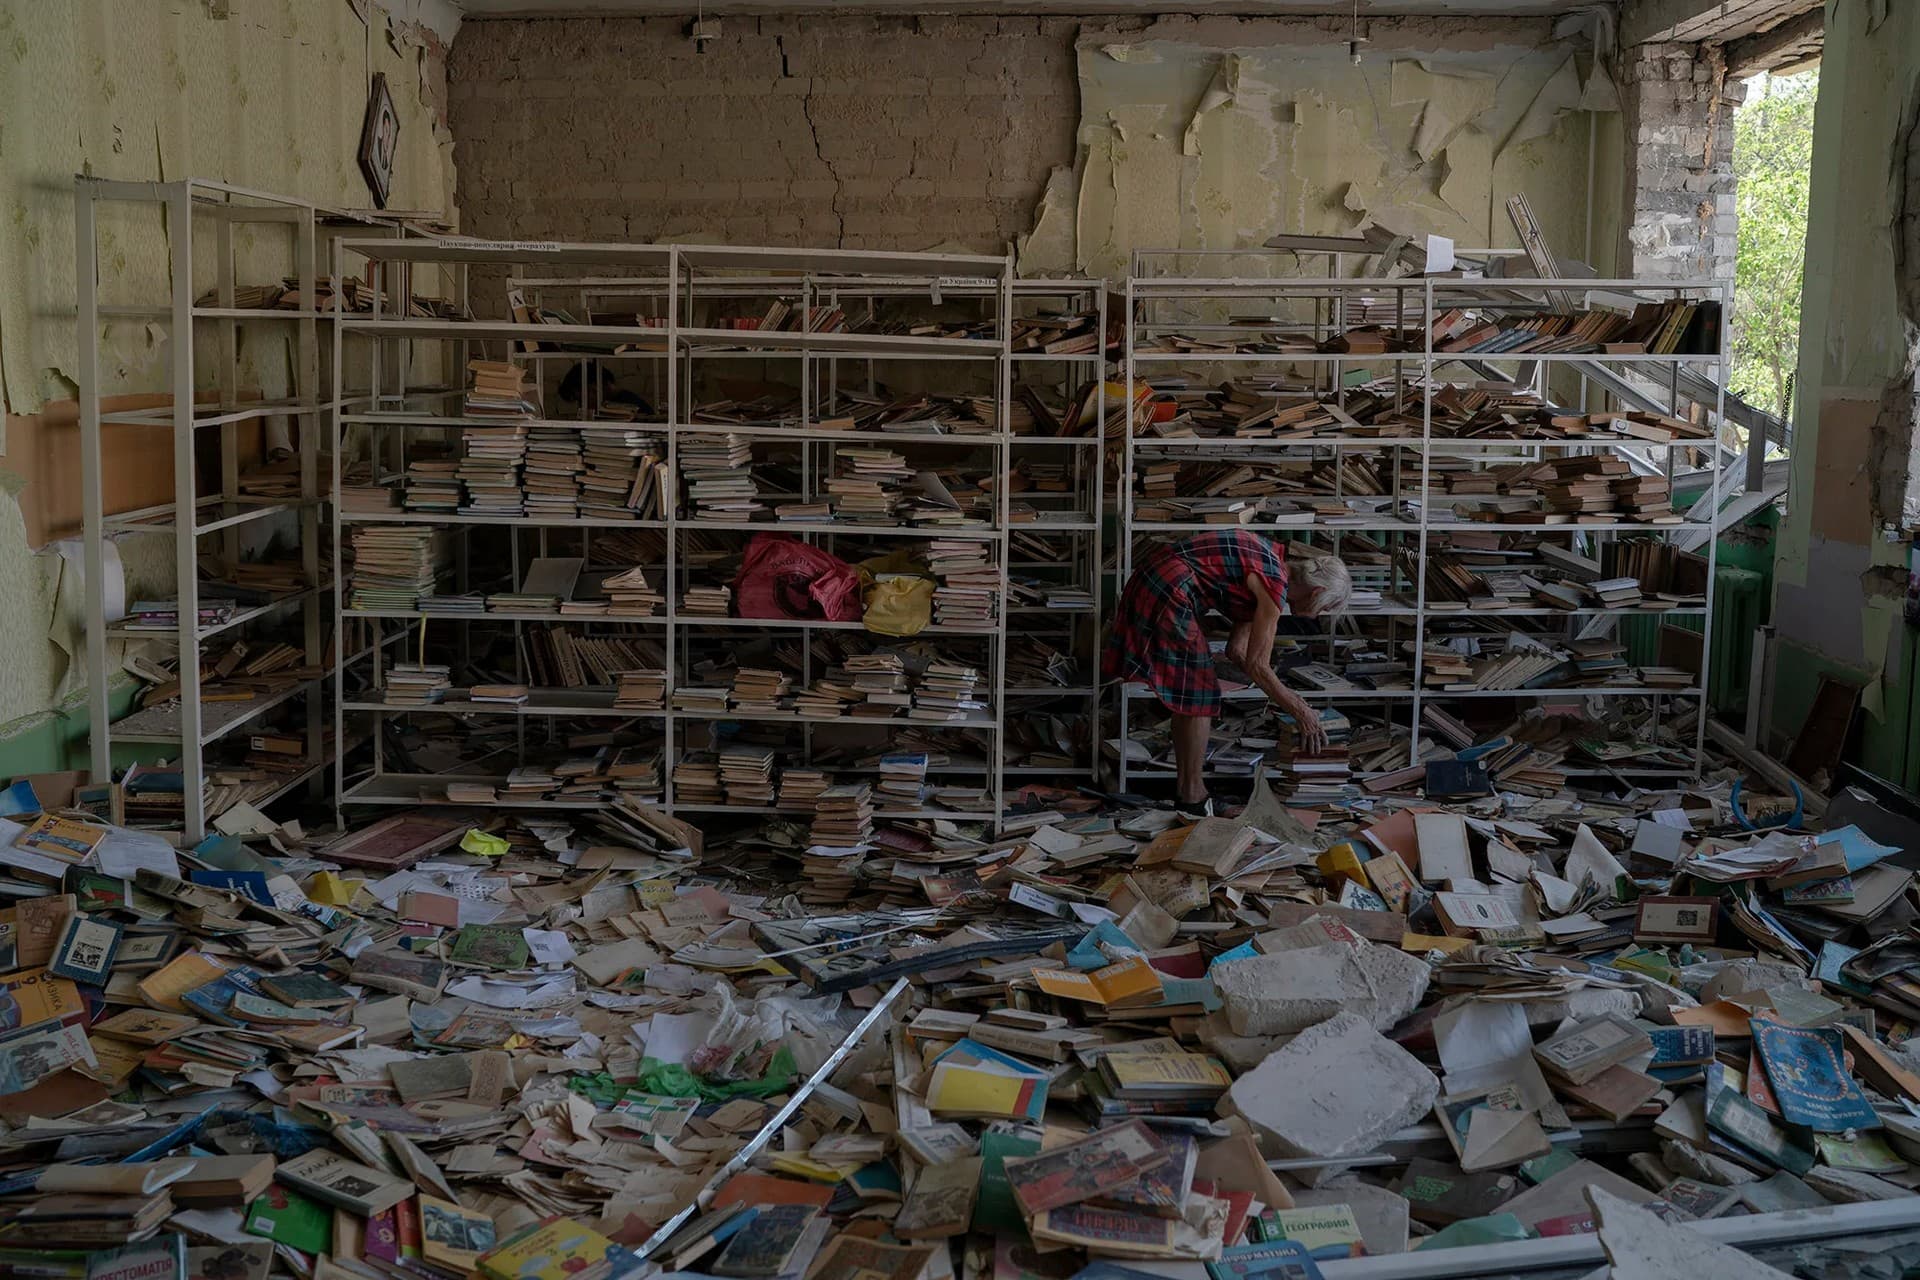 The librarian Raisa Krupchenko makes a pile of books as she tries to organize them among debris at the library of the destroyed School Number 23 in Kramatorsk